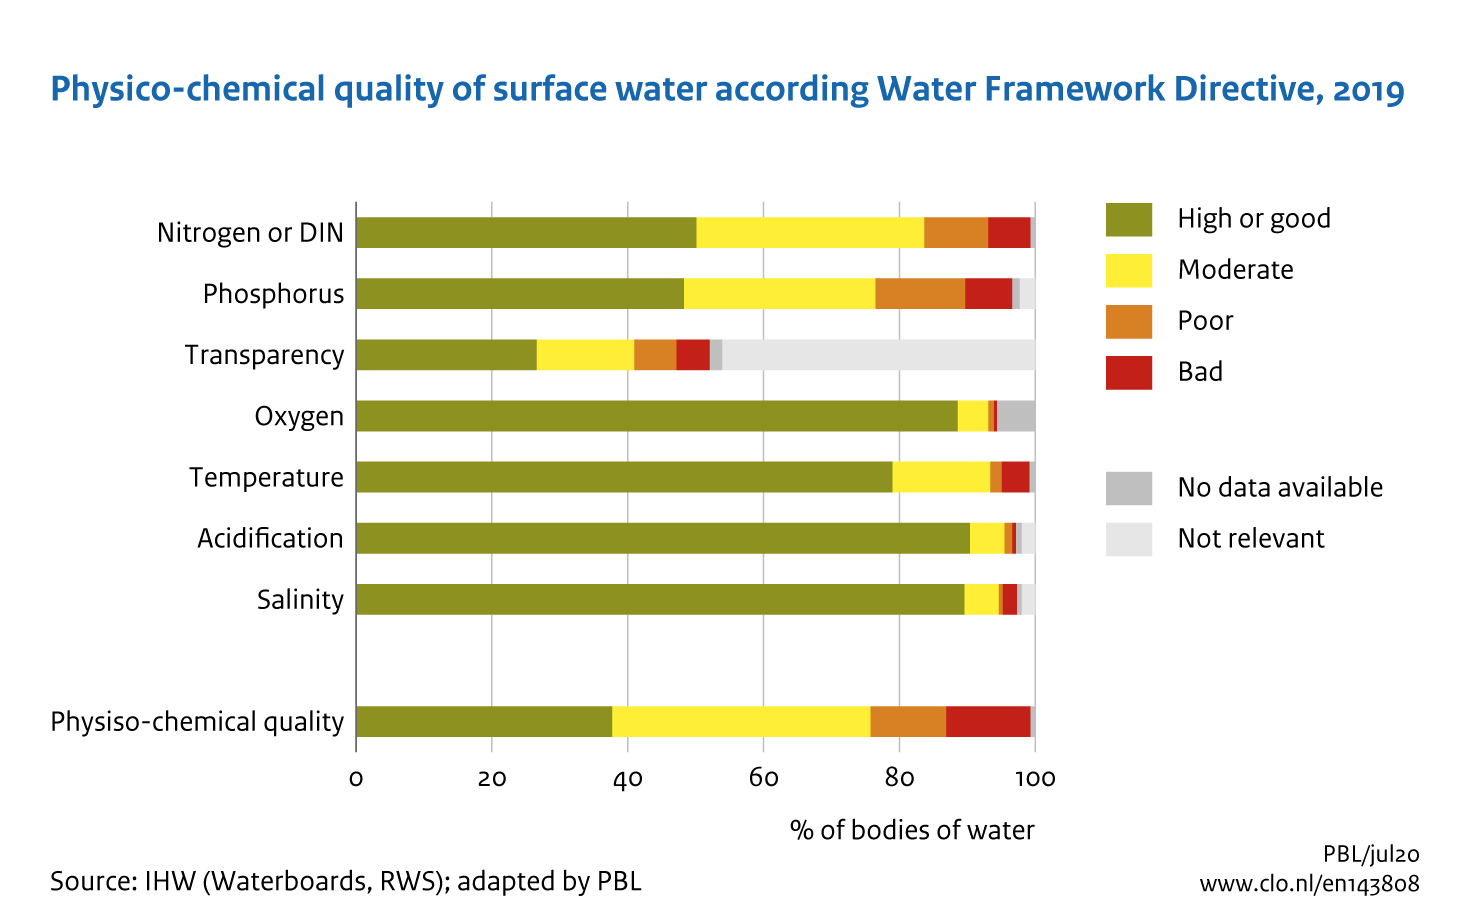 Image Physico-chemical quality assessment Water Framework Directive. The image is further explained in the text.